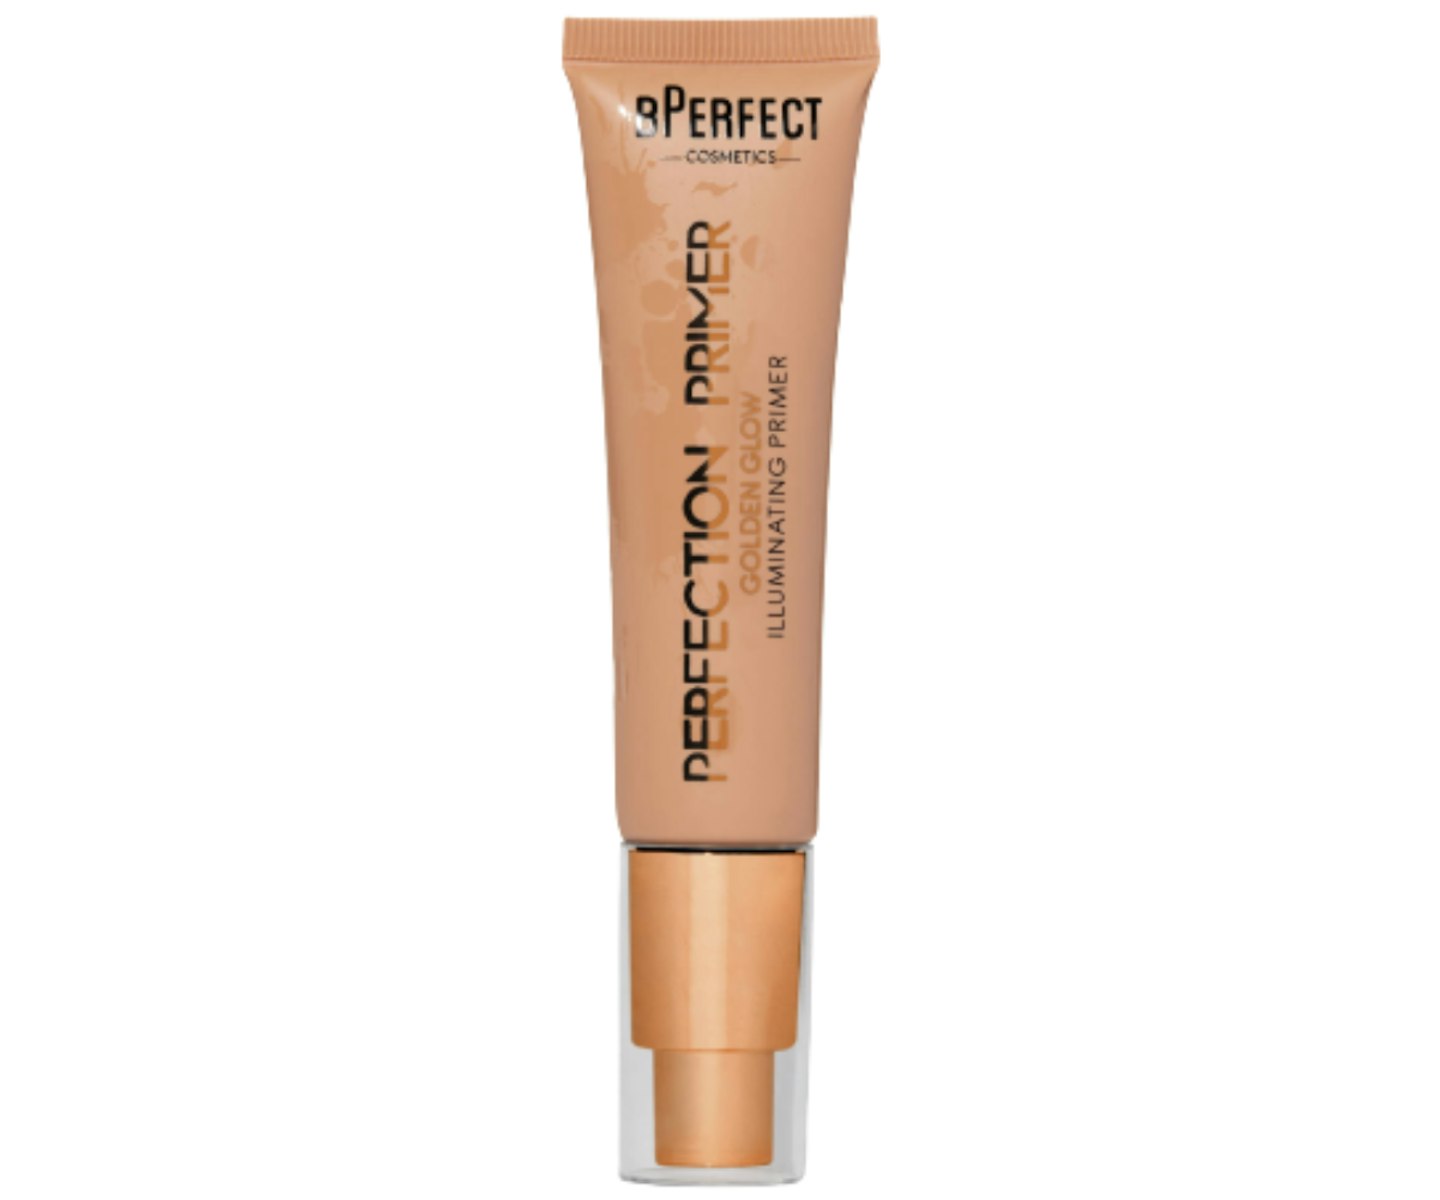 A picture of the BPerfect Perfection Illuminating Primer